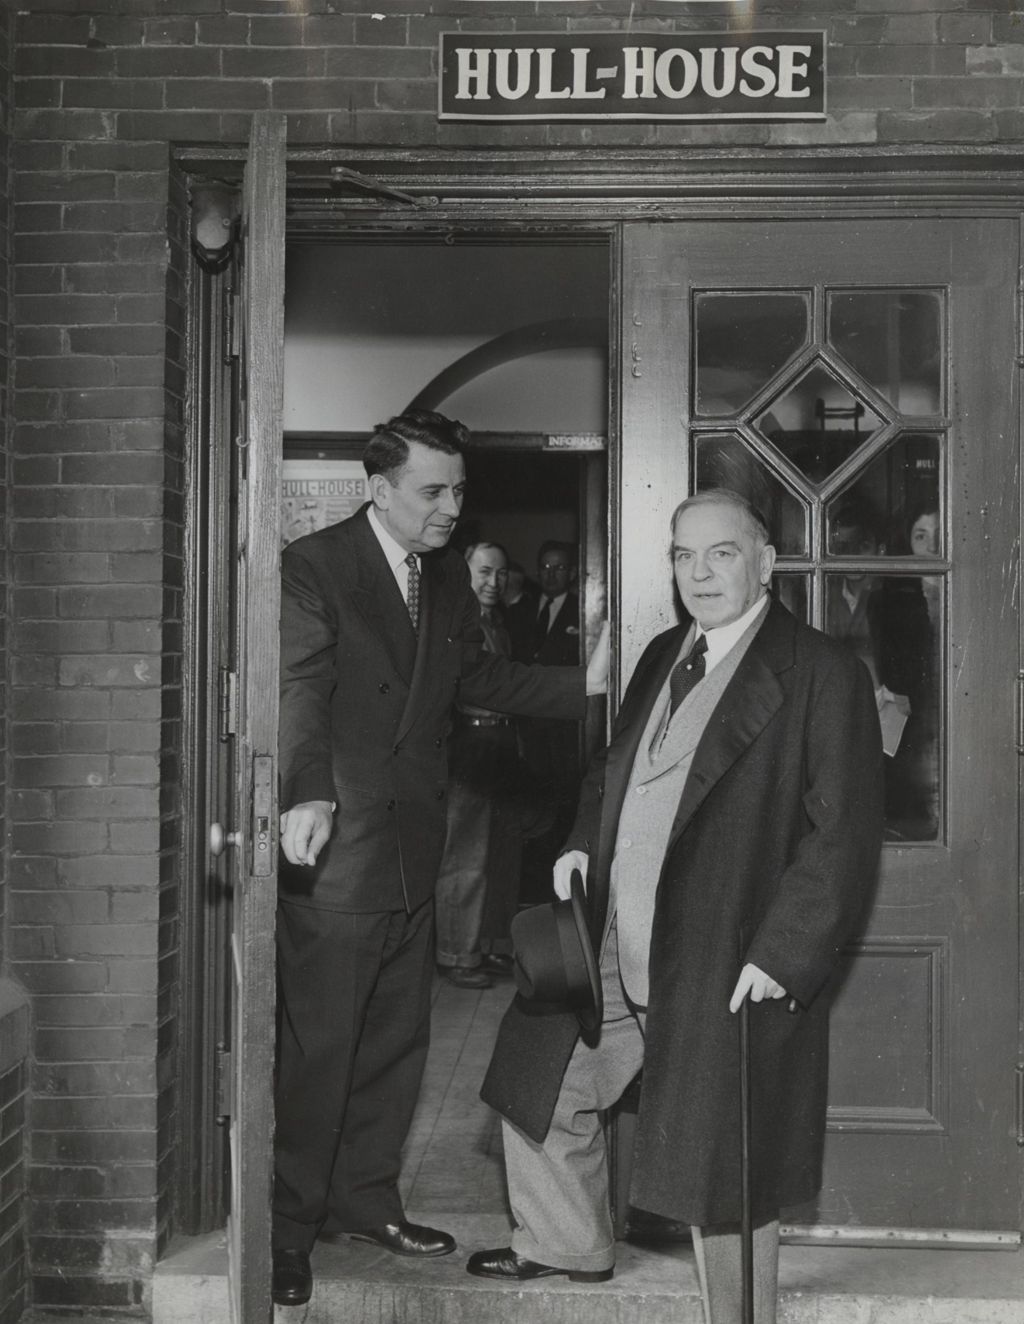 Canadian Prime Minister and former Hull-House resident W. L. Mackenzie King at the entrance of Hull-House